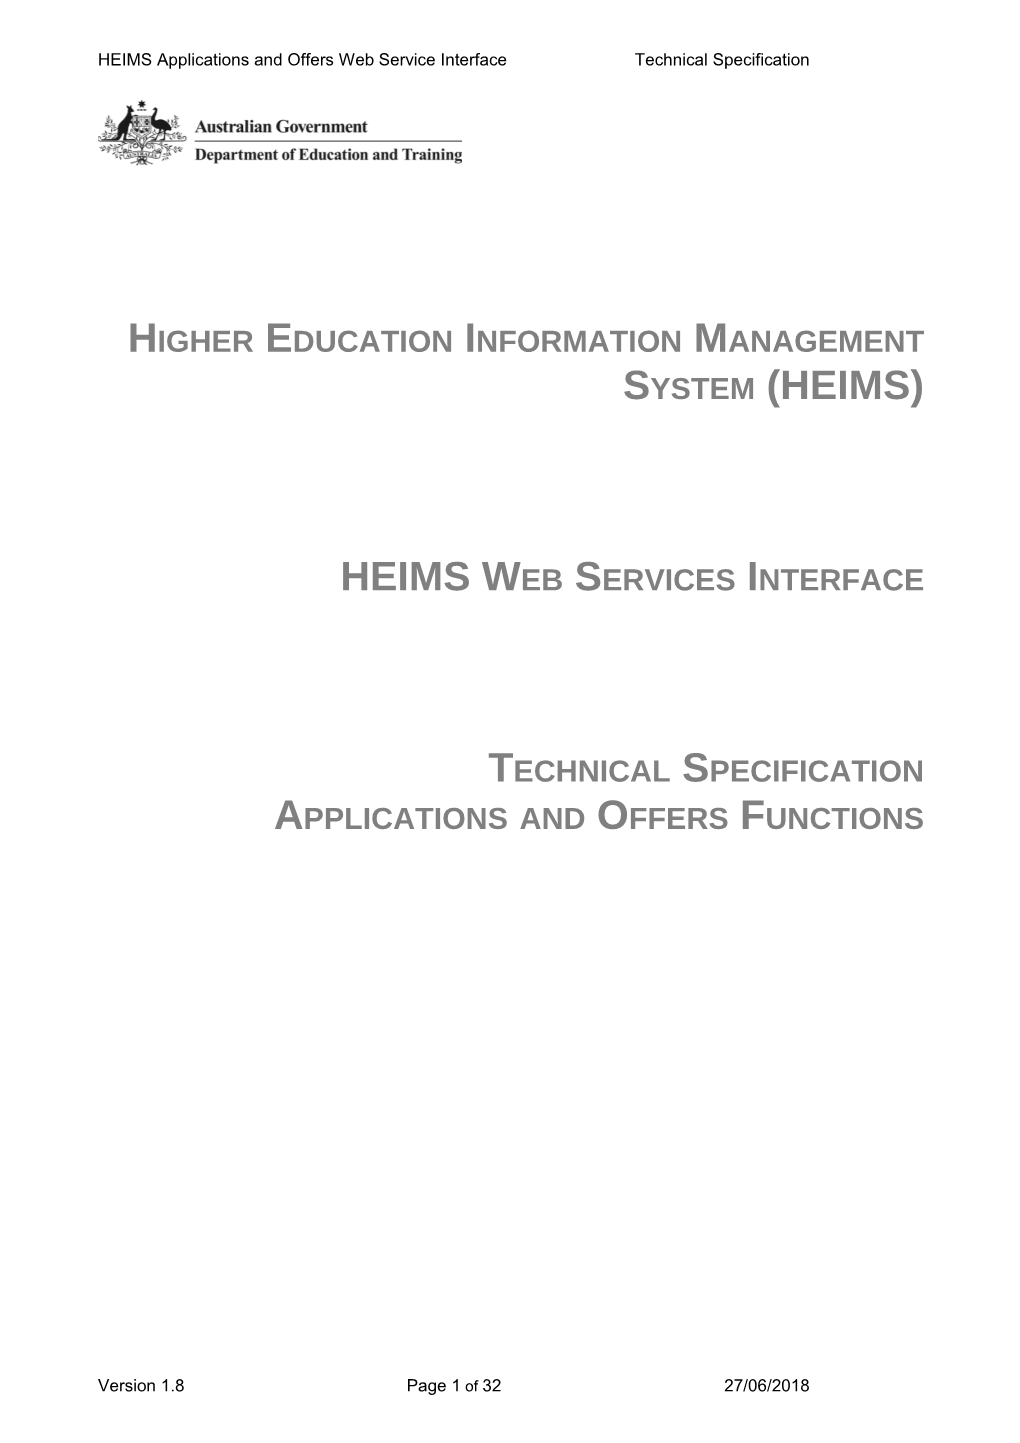 University Applications and Offers Data - HEIMS Web Services Technical Specification